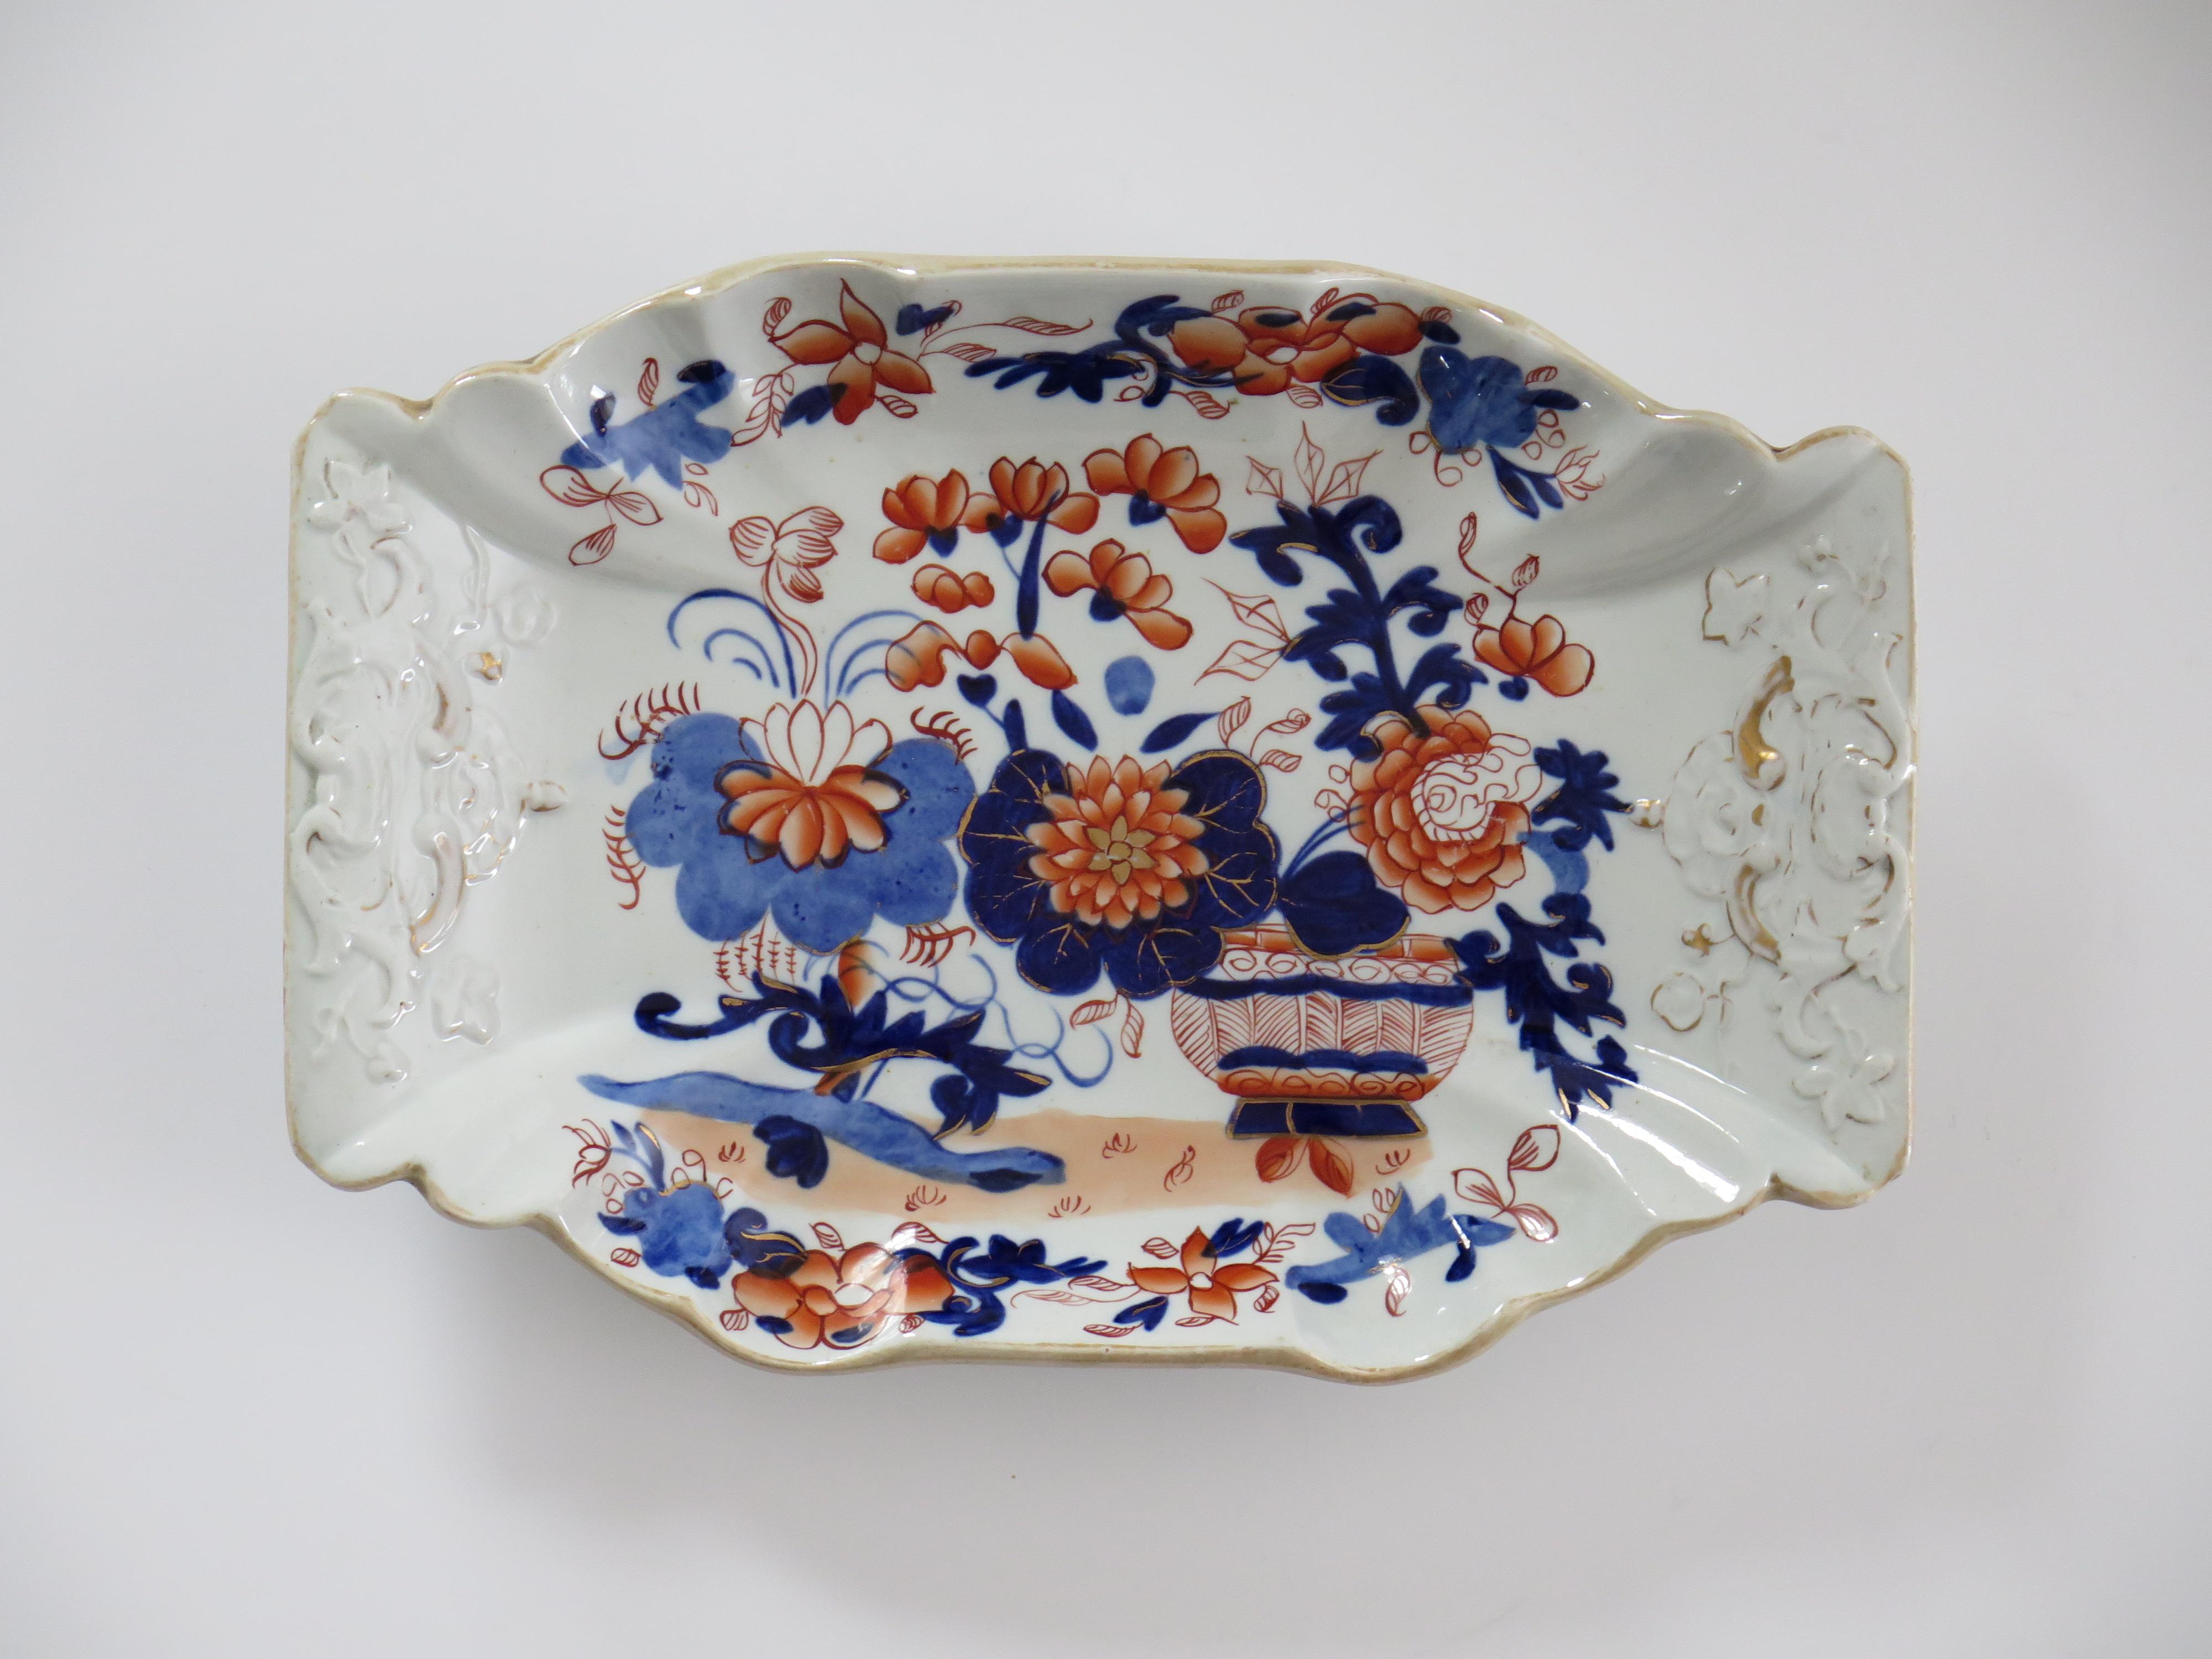 This is a very good, early Serving Desert Dish or platter made by Mason's Ironstone in the gilded Basket Japan pattern, in the English, late Georgian period, circa 1813-1820.

This piece is well potted with shaped sides, formed as handles for